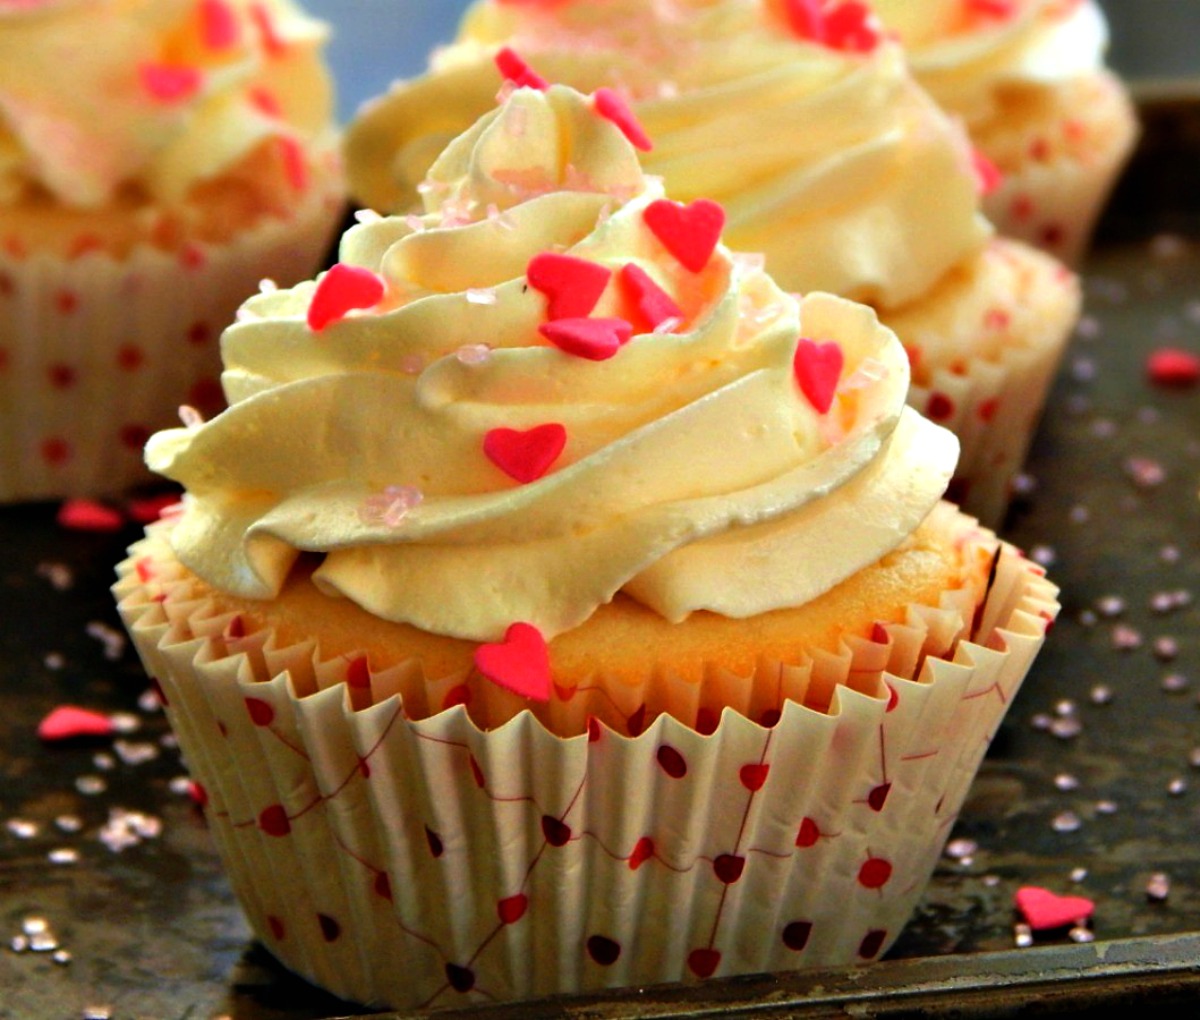 Raspberry filled Vanilla Cupcakes with White Chocolate Buttercream Frosting.